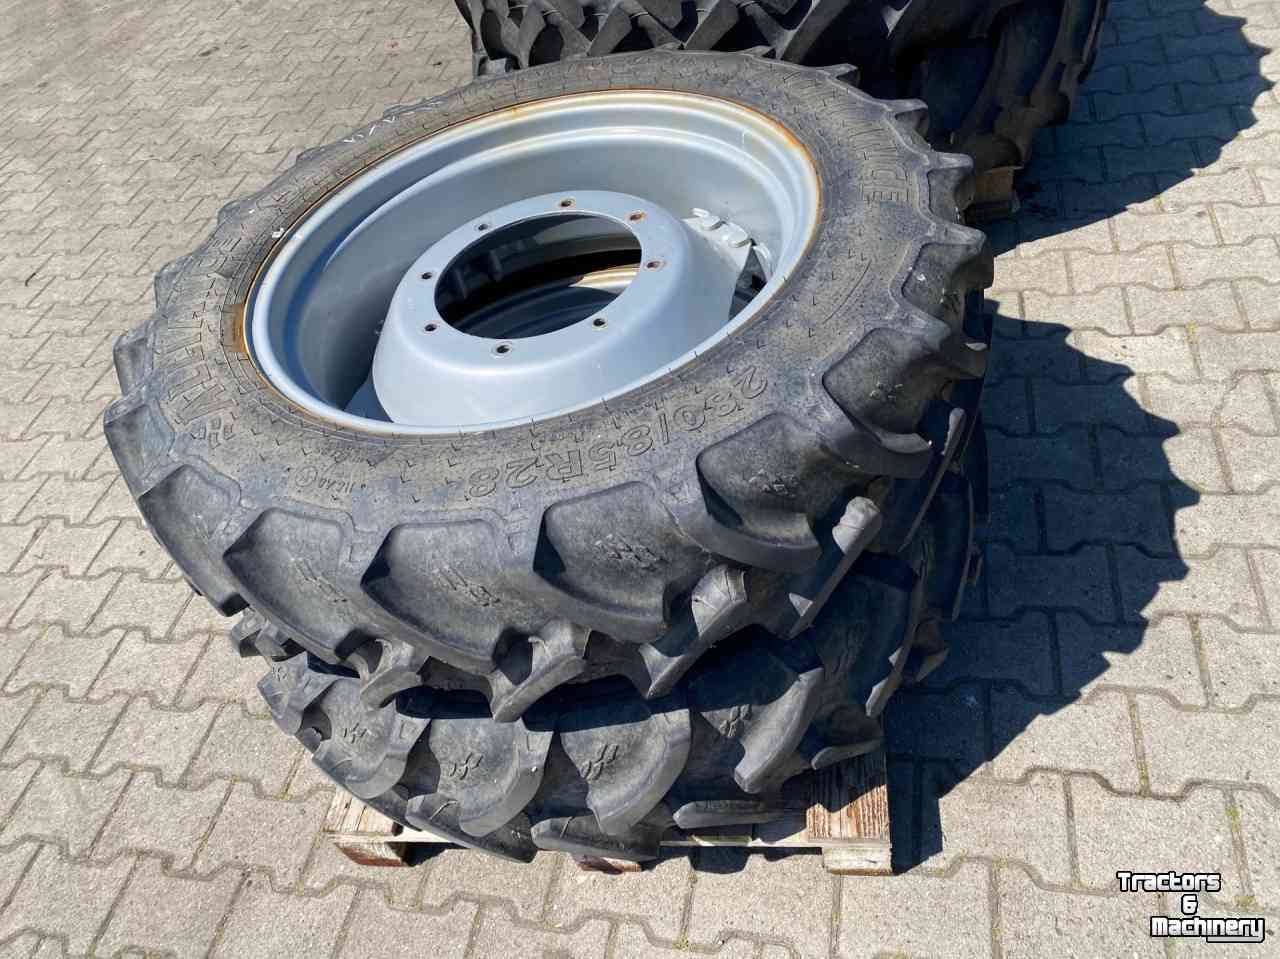 Wheels, Tyres, Rims & Dual spacers New Holland 340/85R38   280/85R28